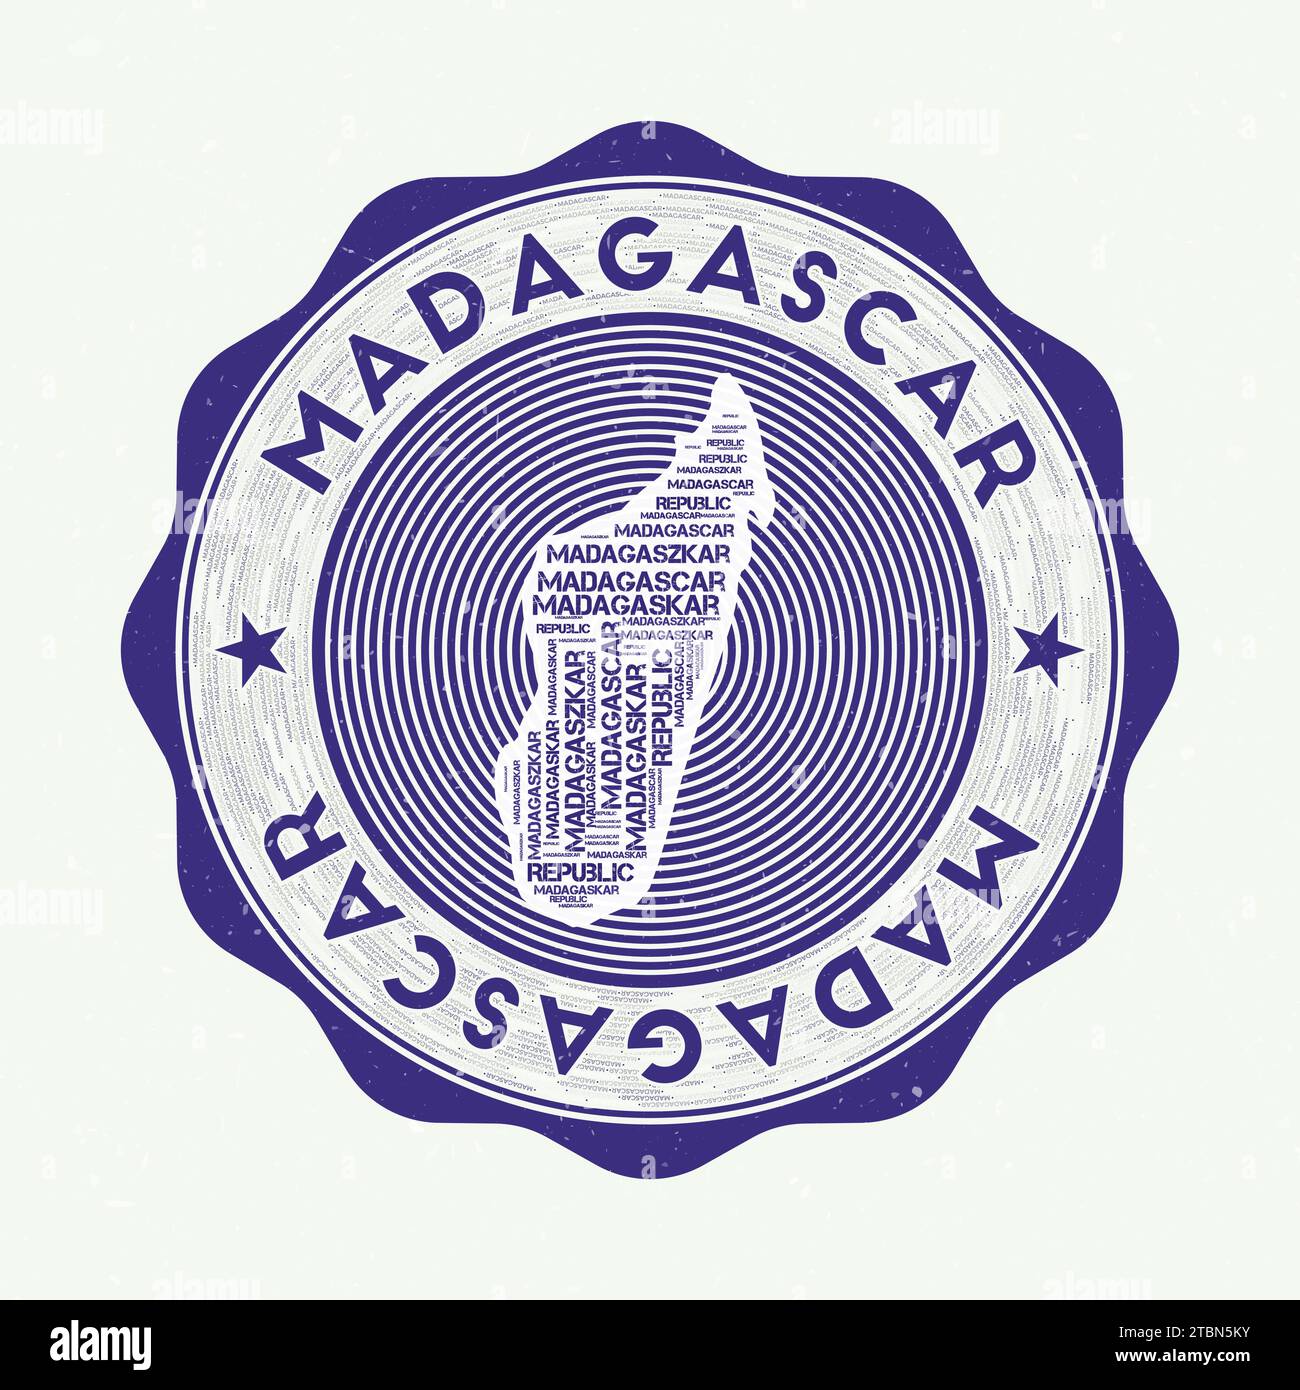 Madagascar seal. Country round logo with shape of Madagascar and country name in multiple languages wordcloud. Astonishing emblem. Charming vector ill Stock Vector